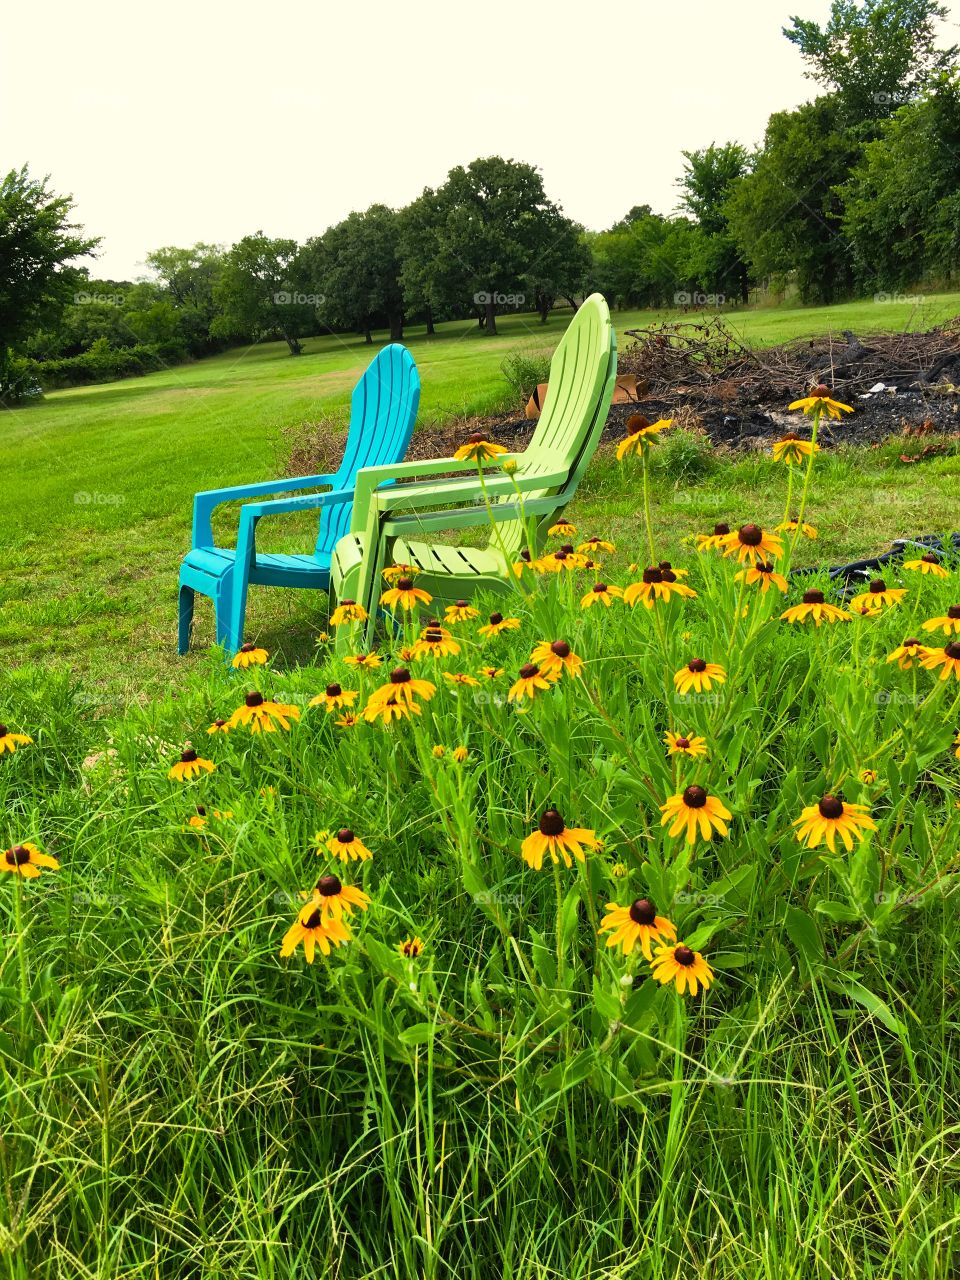 Lawn chairs nestled in wild yellow sunflowers in a countryside pasture 